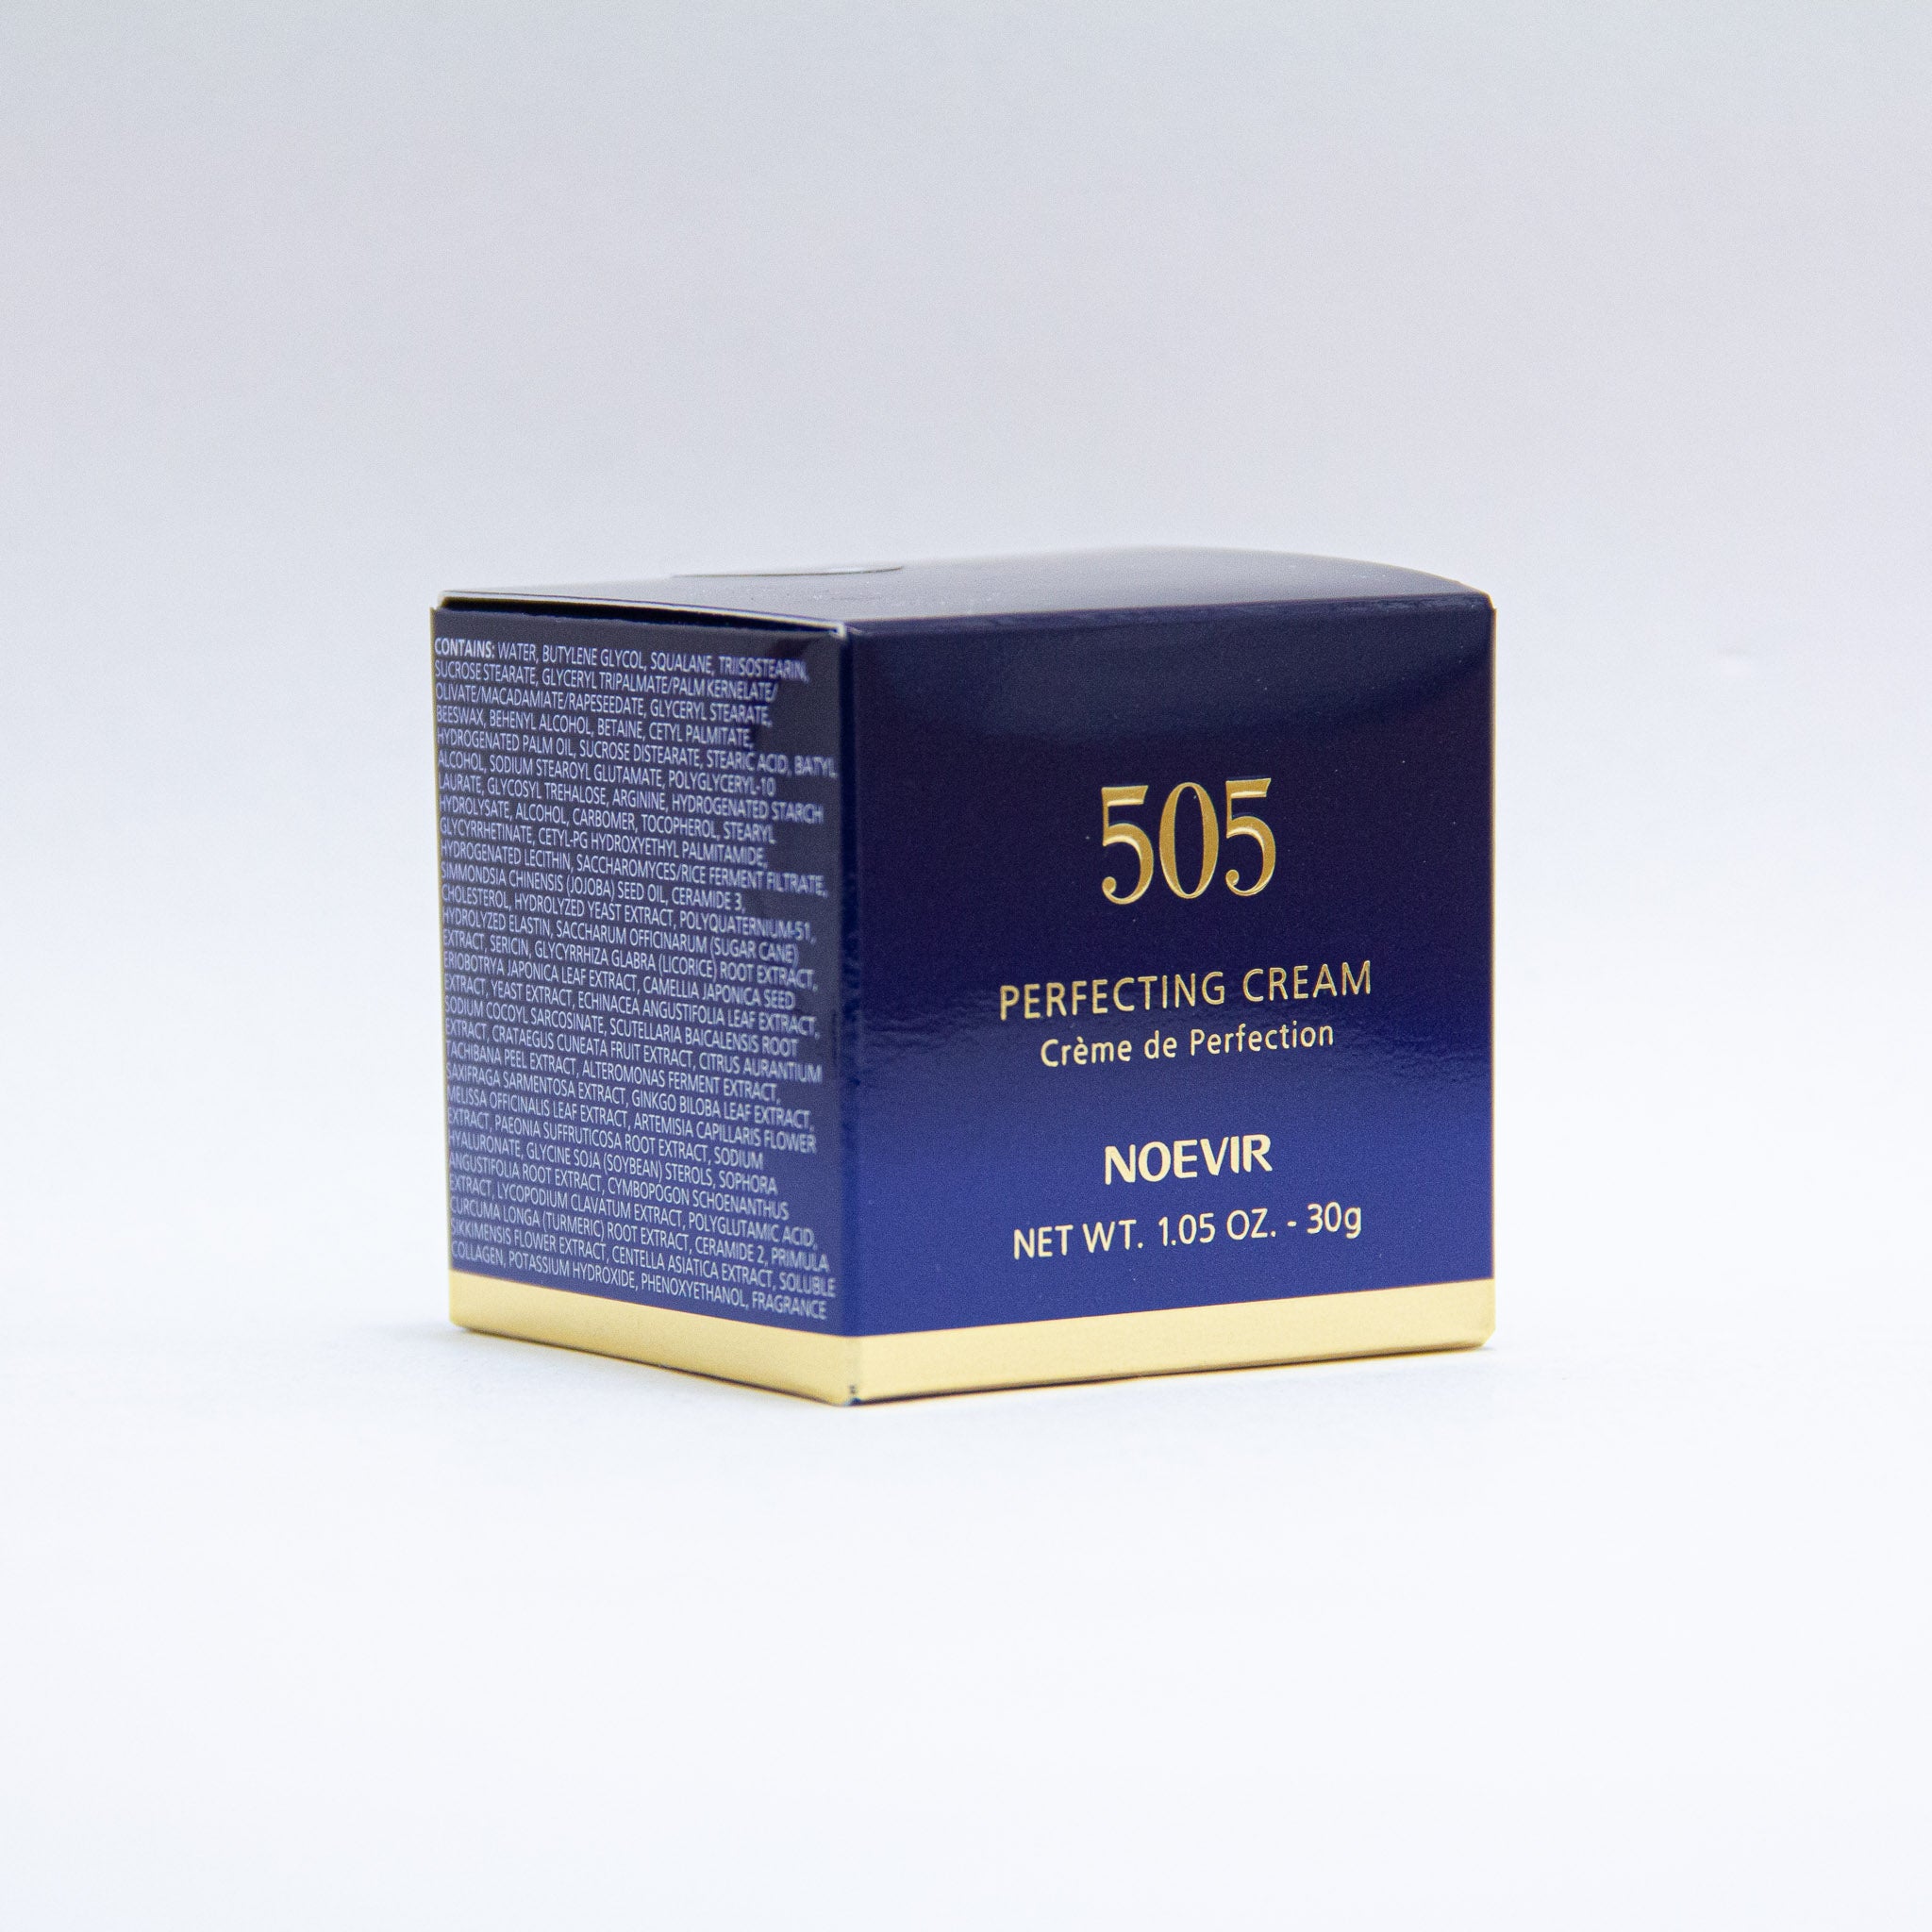 Noevir 505 Perfecting Cream, 1.05 oz:   This light and velvety cream wraps the skin in luxury, sealing in moisture and enhancing the skin’s natural glow, while natural antioxidants help prevent free-radical damage to the skin.